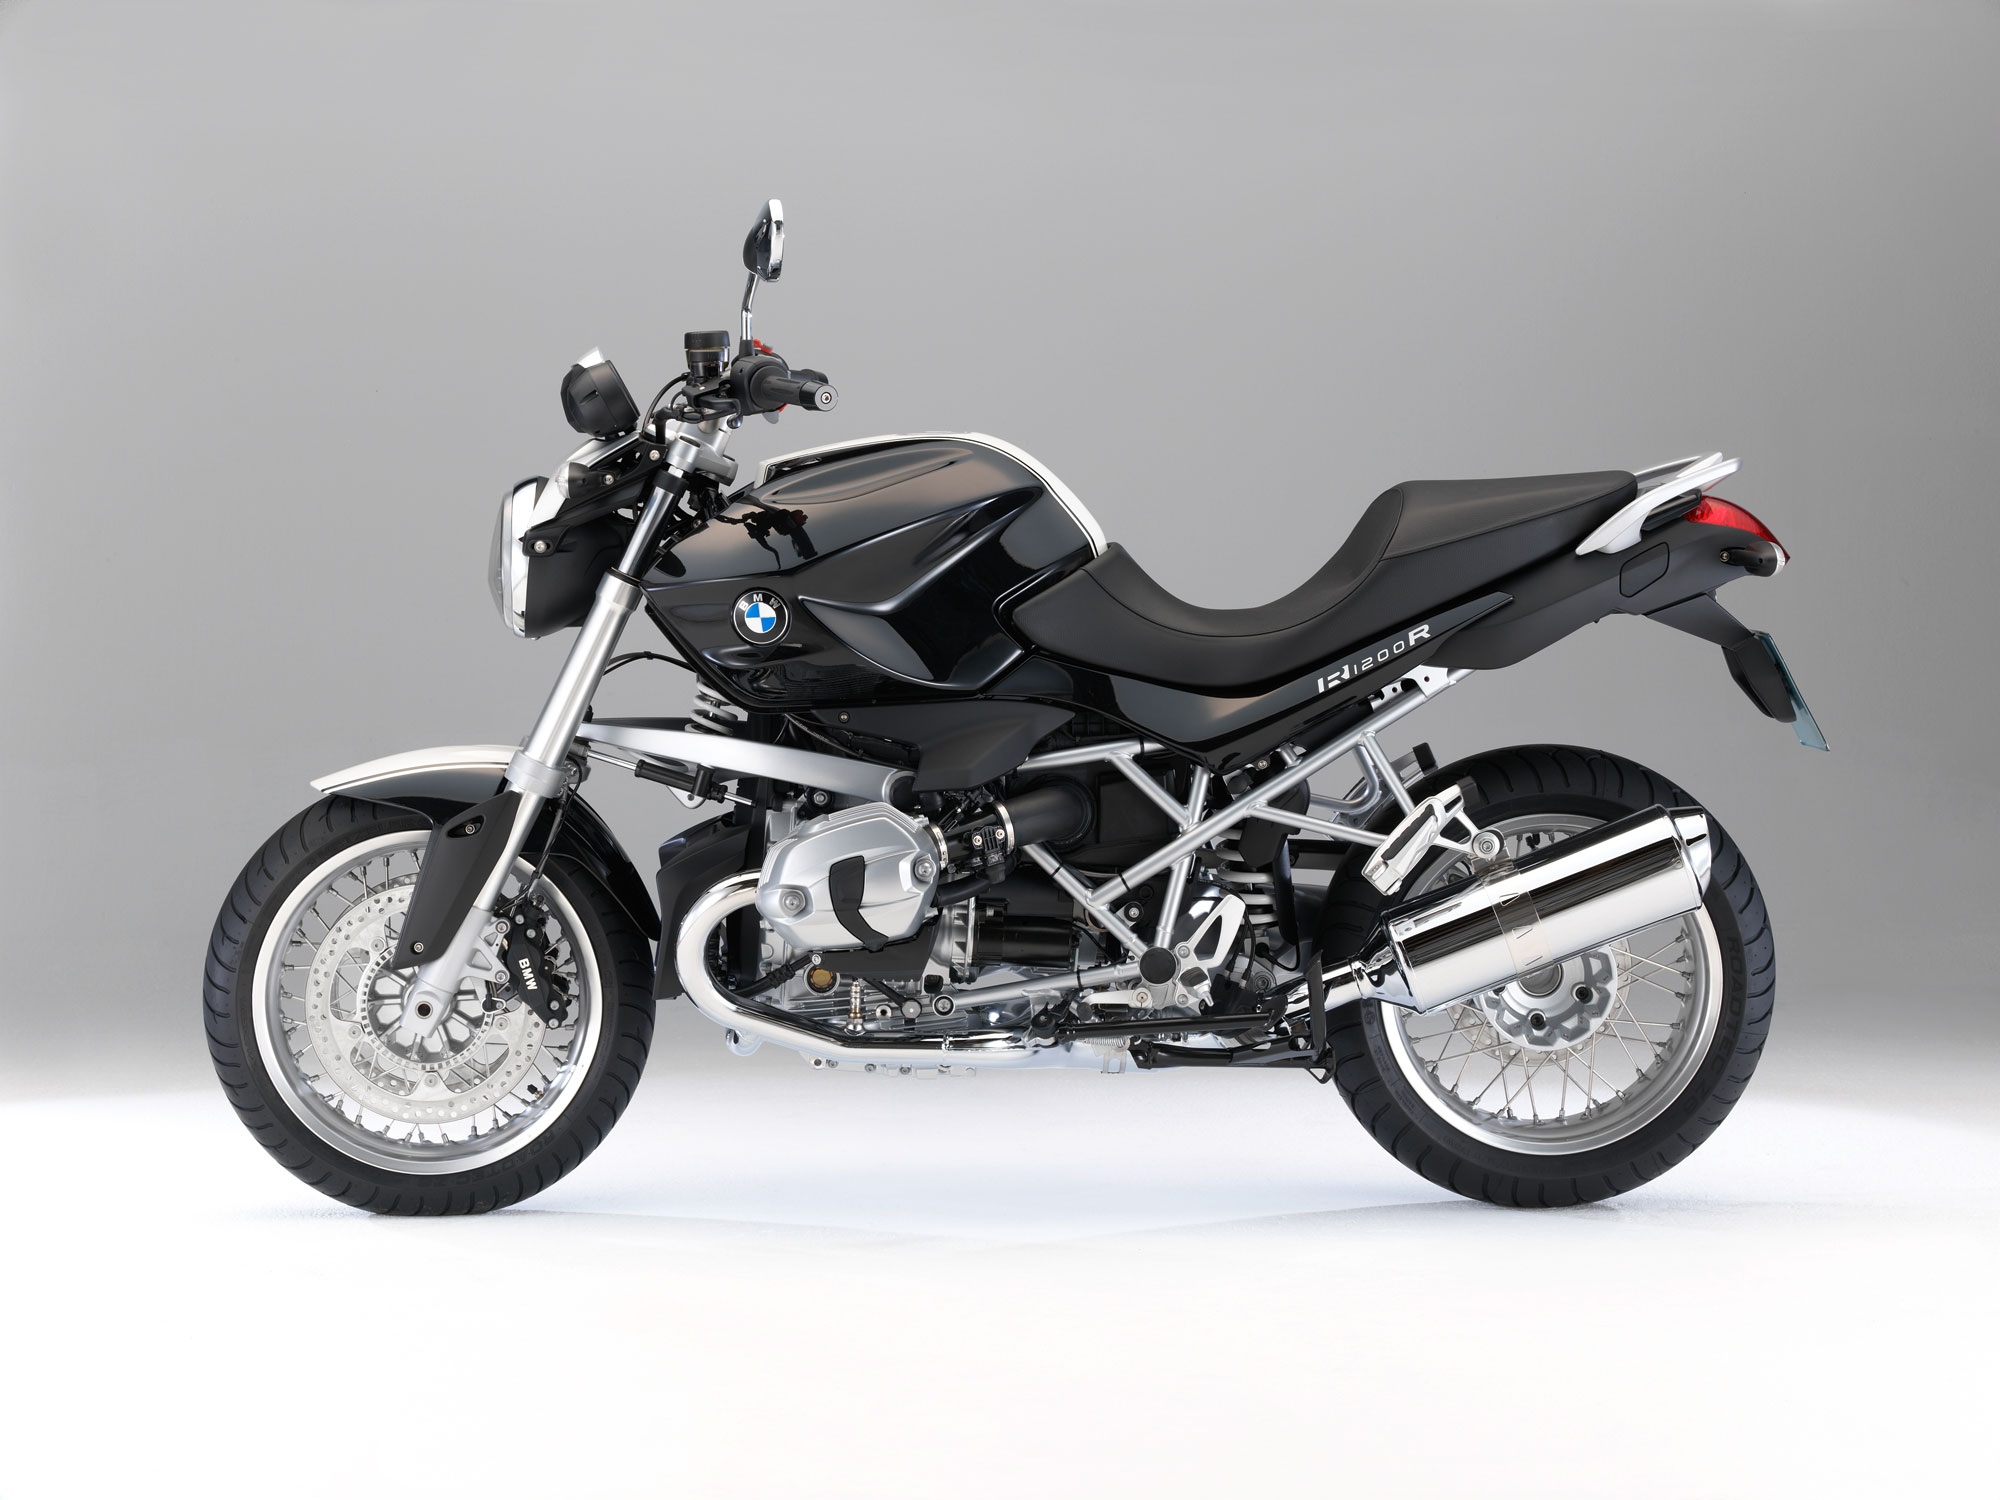 BMW R 1200 R Review | Motorcycle News, Sport and Reviews